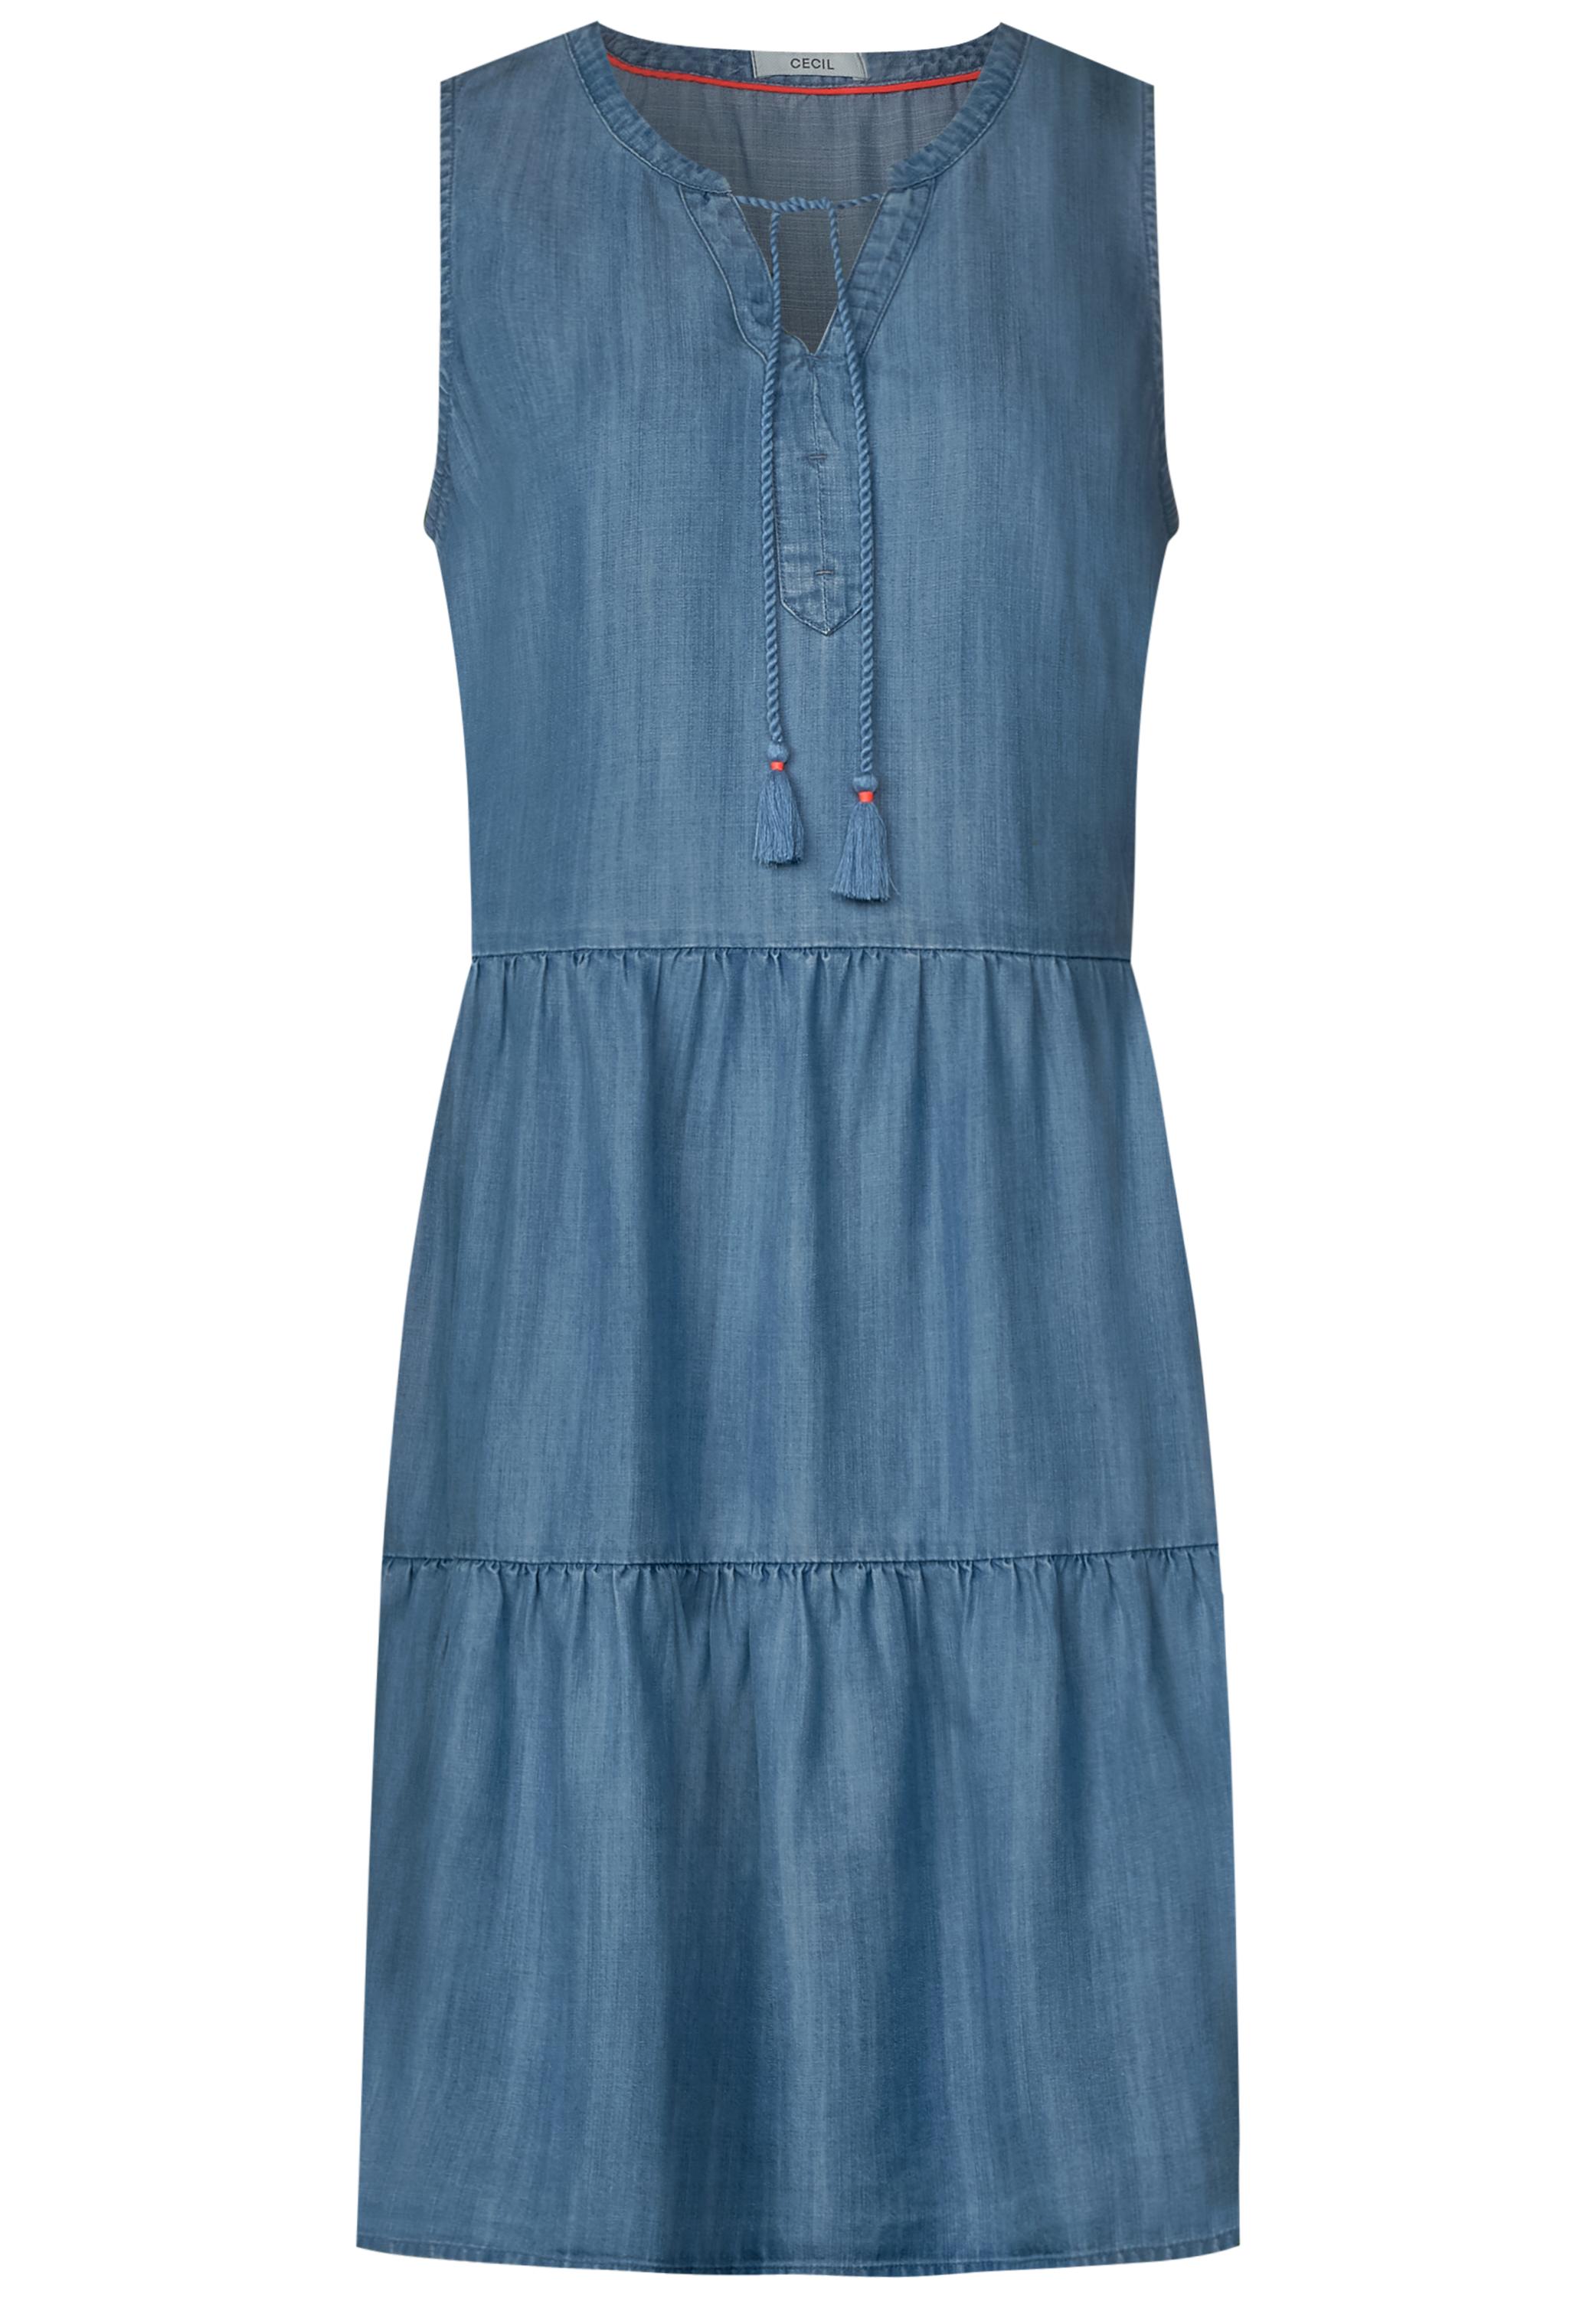 Mid Kleid - Mode Blue CECIL CONCEPT B142459-10283 in Wash